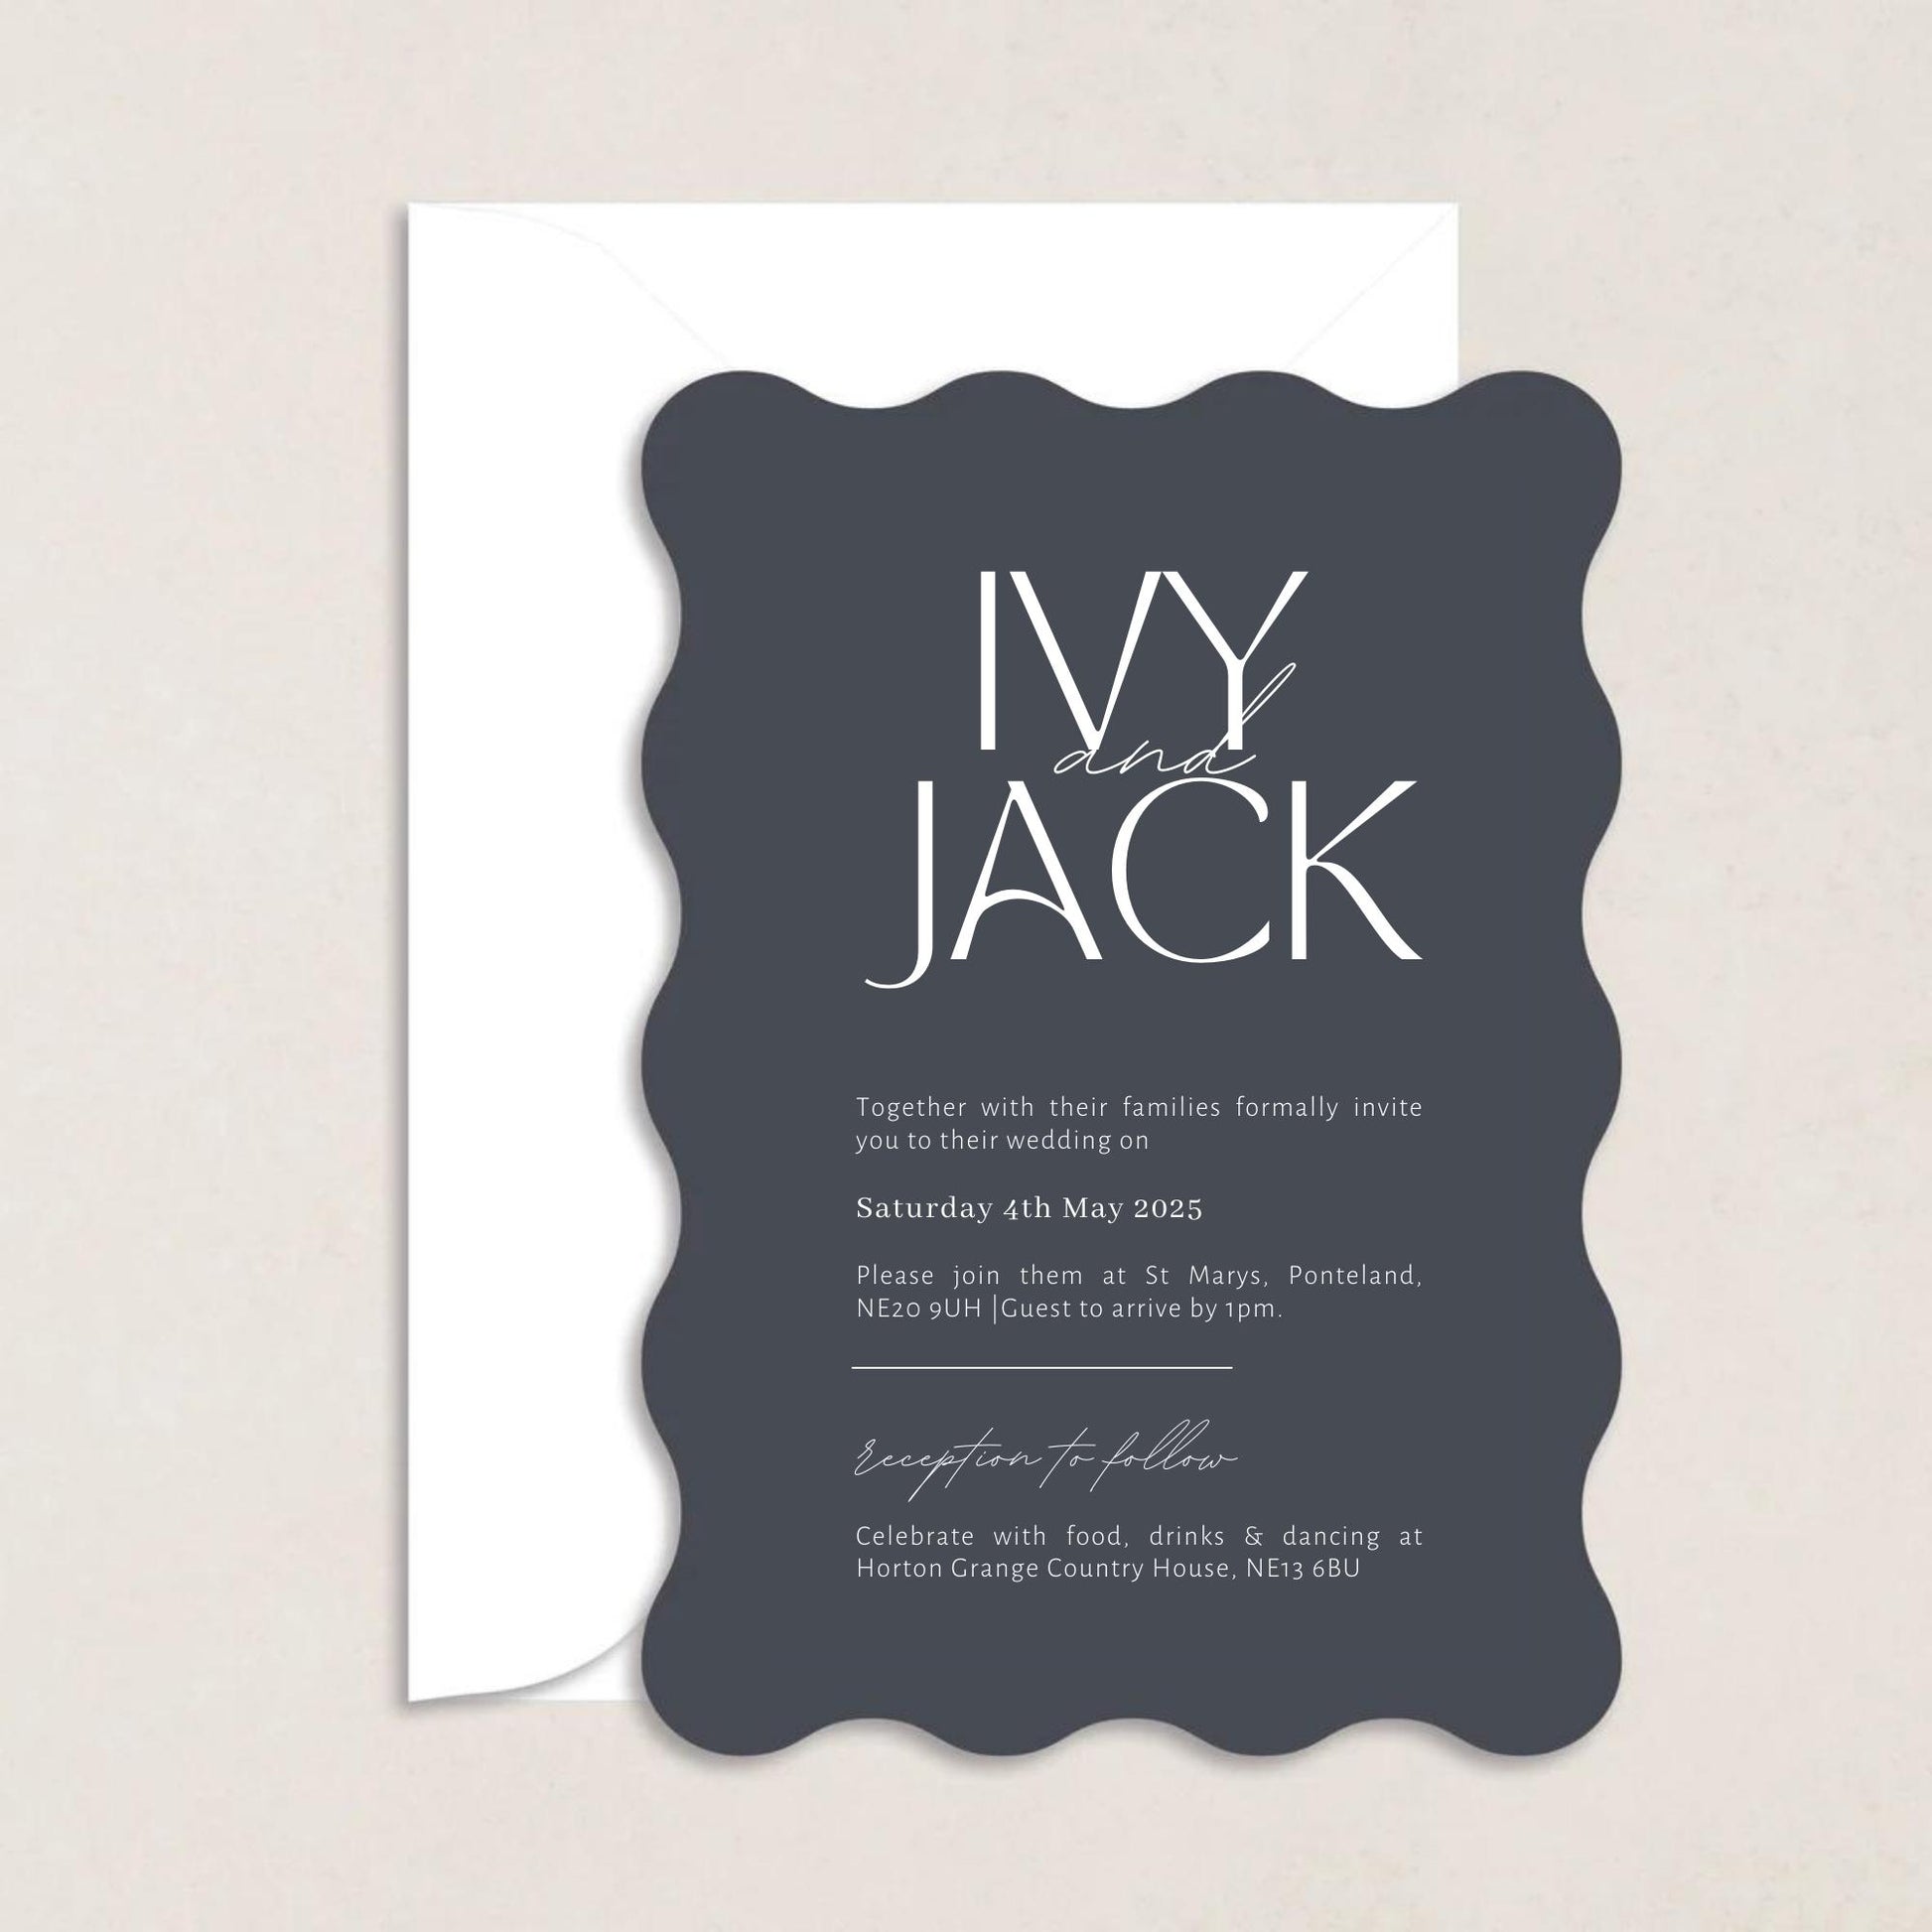 Ivy Wedding Invitations - Wedding Invitations available at The Ivy Collection | Luxury Wedding Stationery